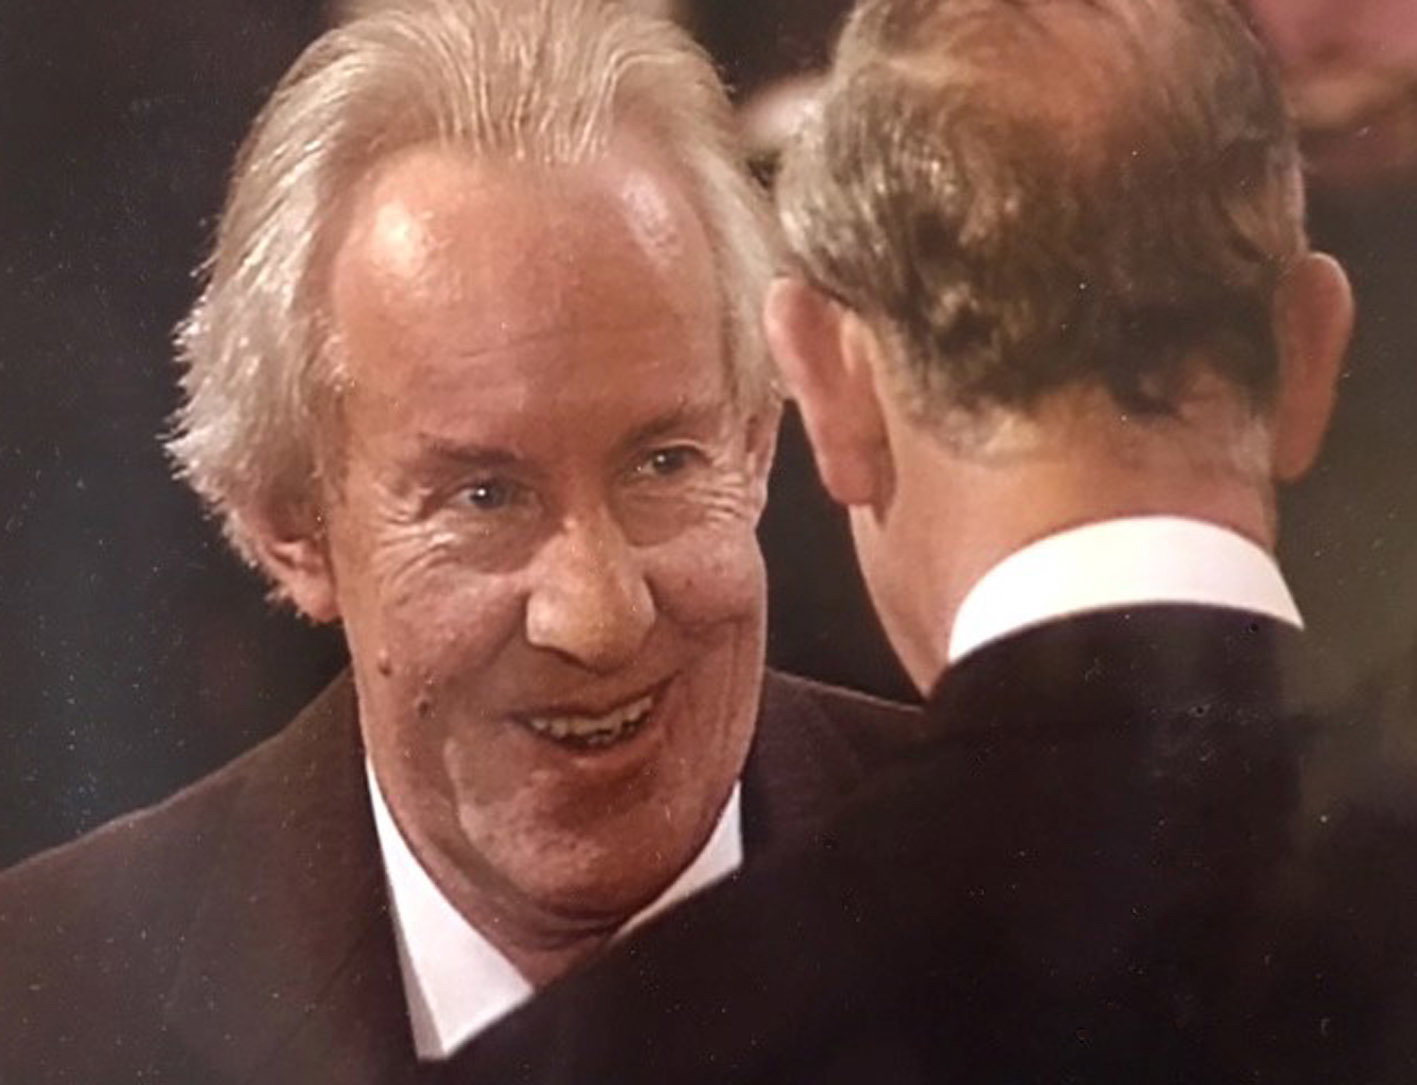 Julian Burrell was awarded an OBE from Prince Charles in 2006.